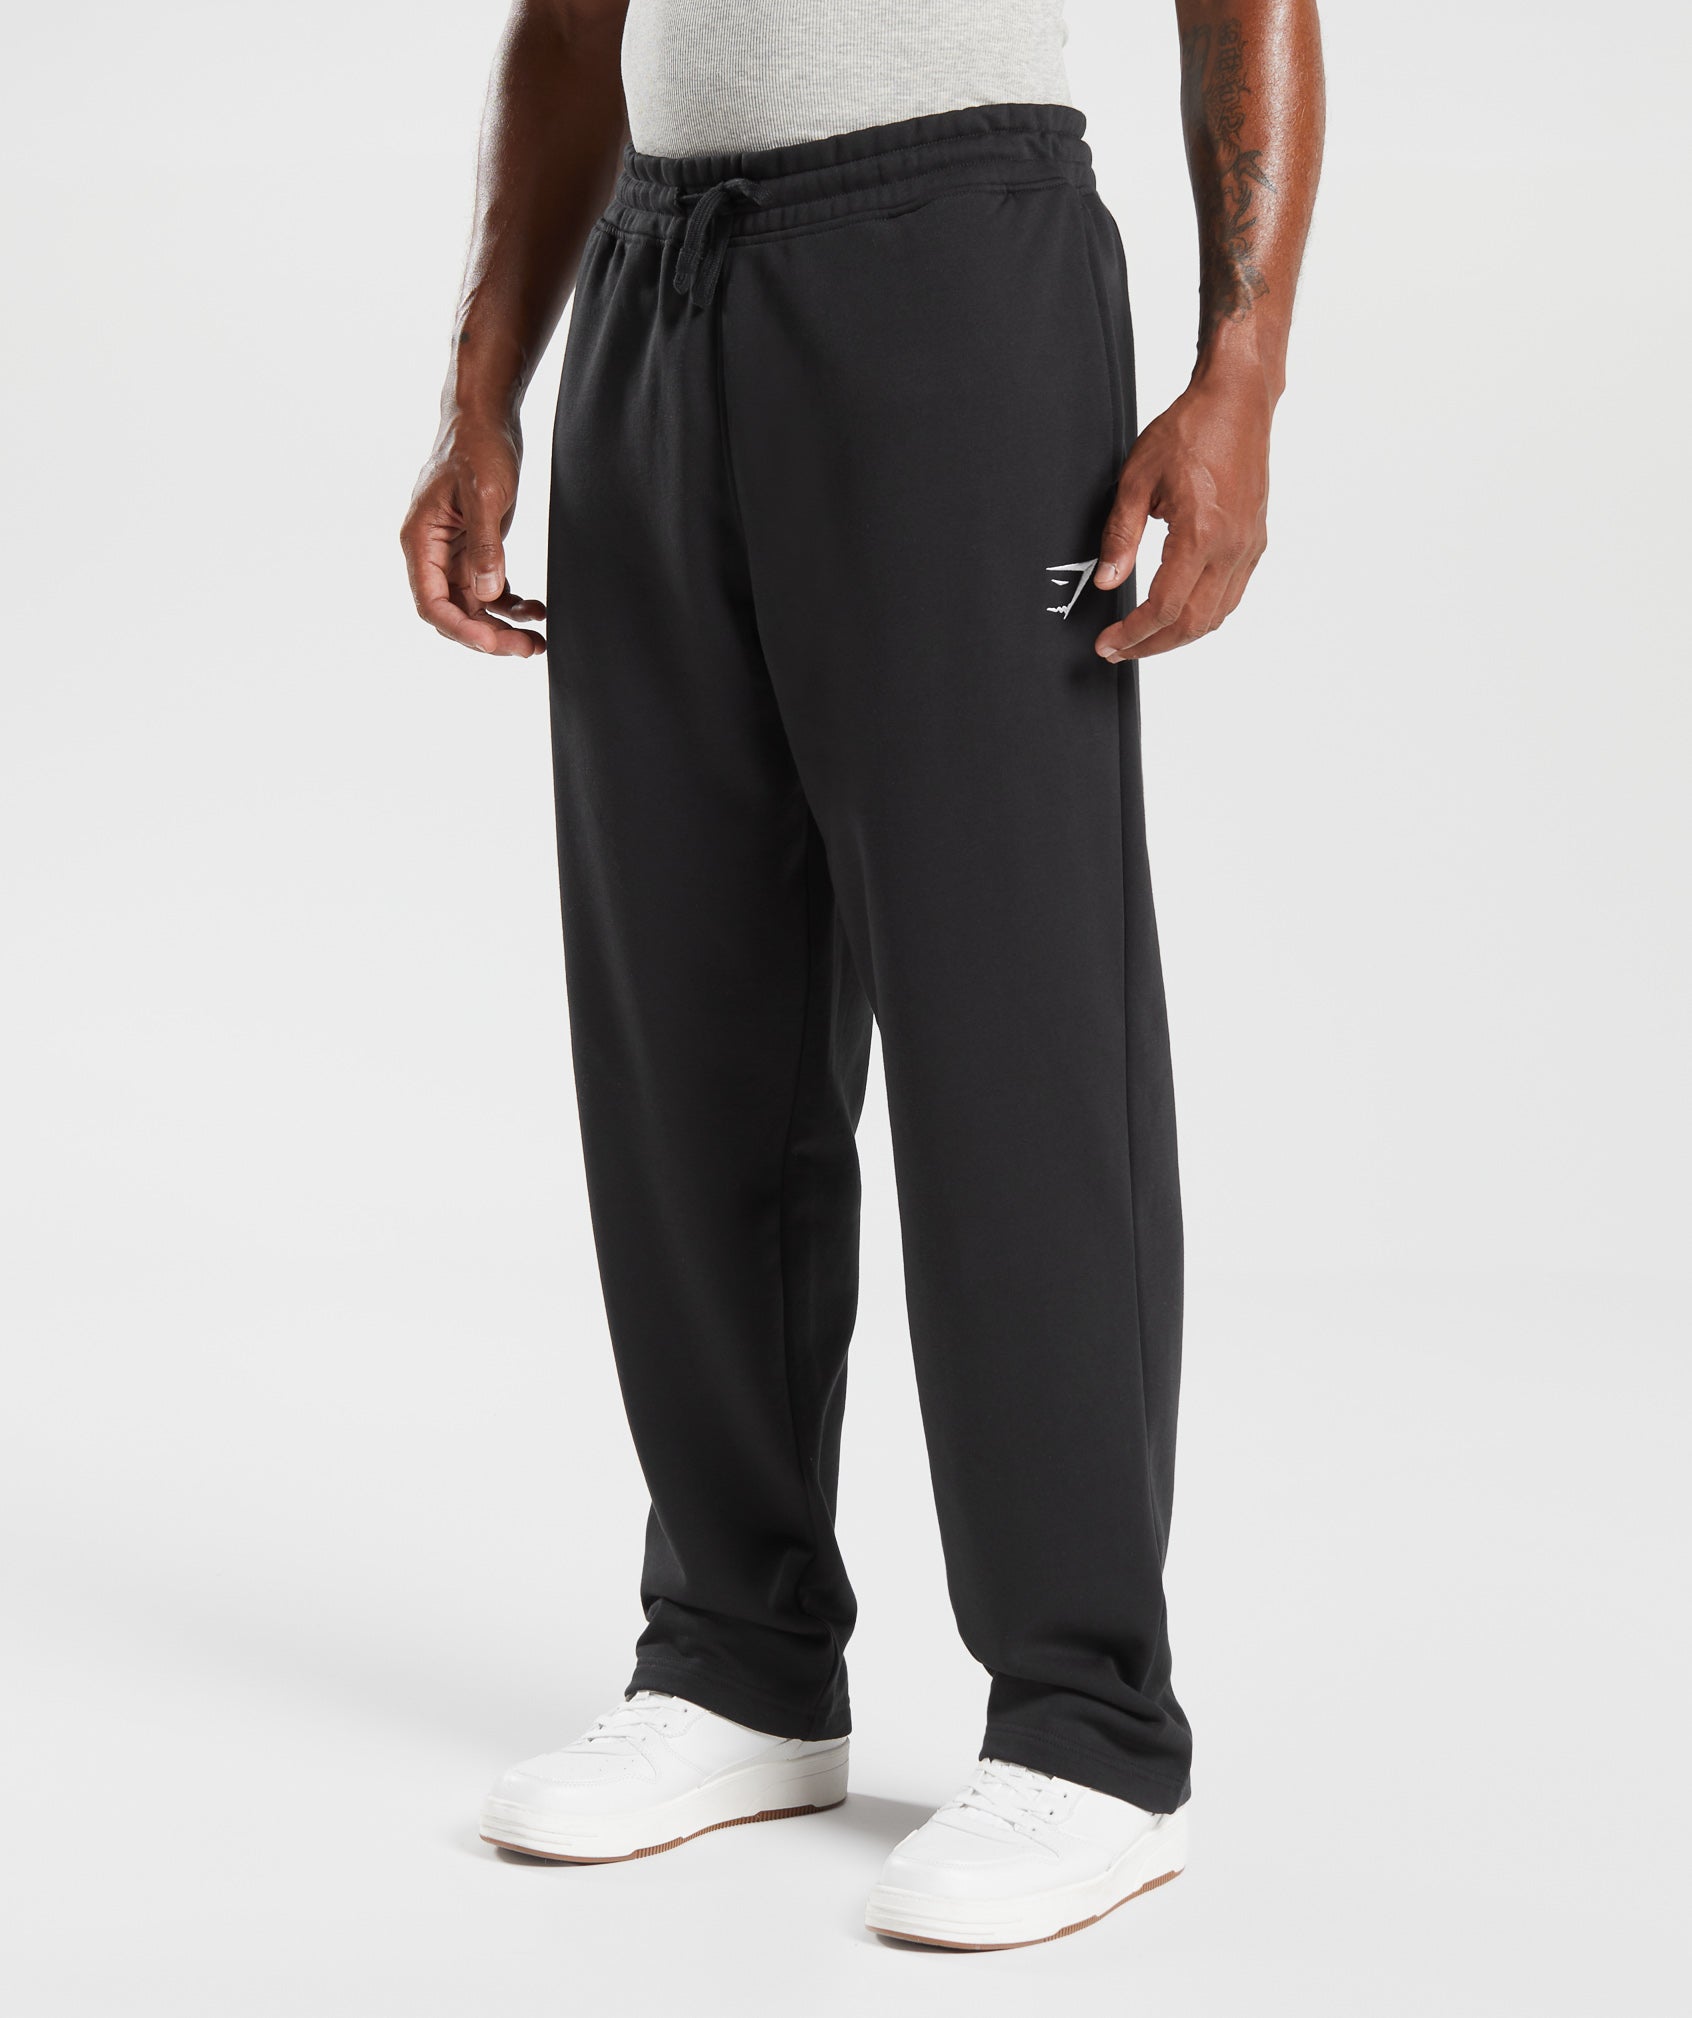 Crest Straight Leg Joggers in Black - view 3